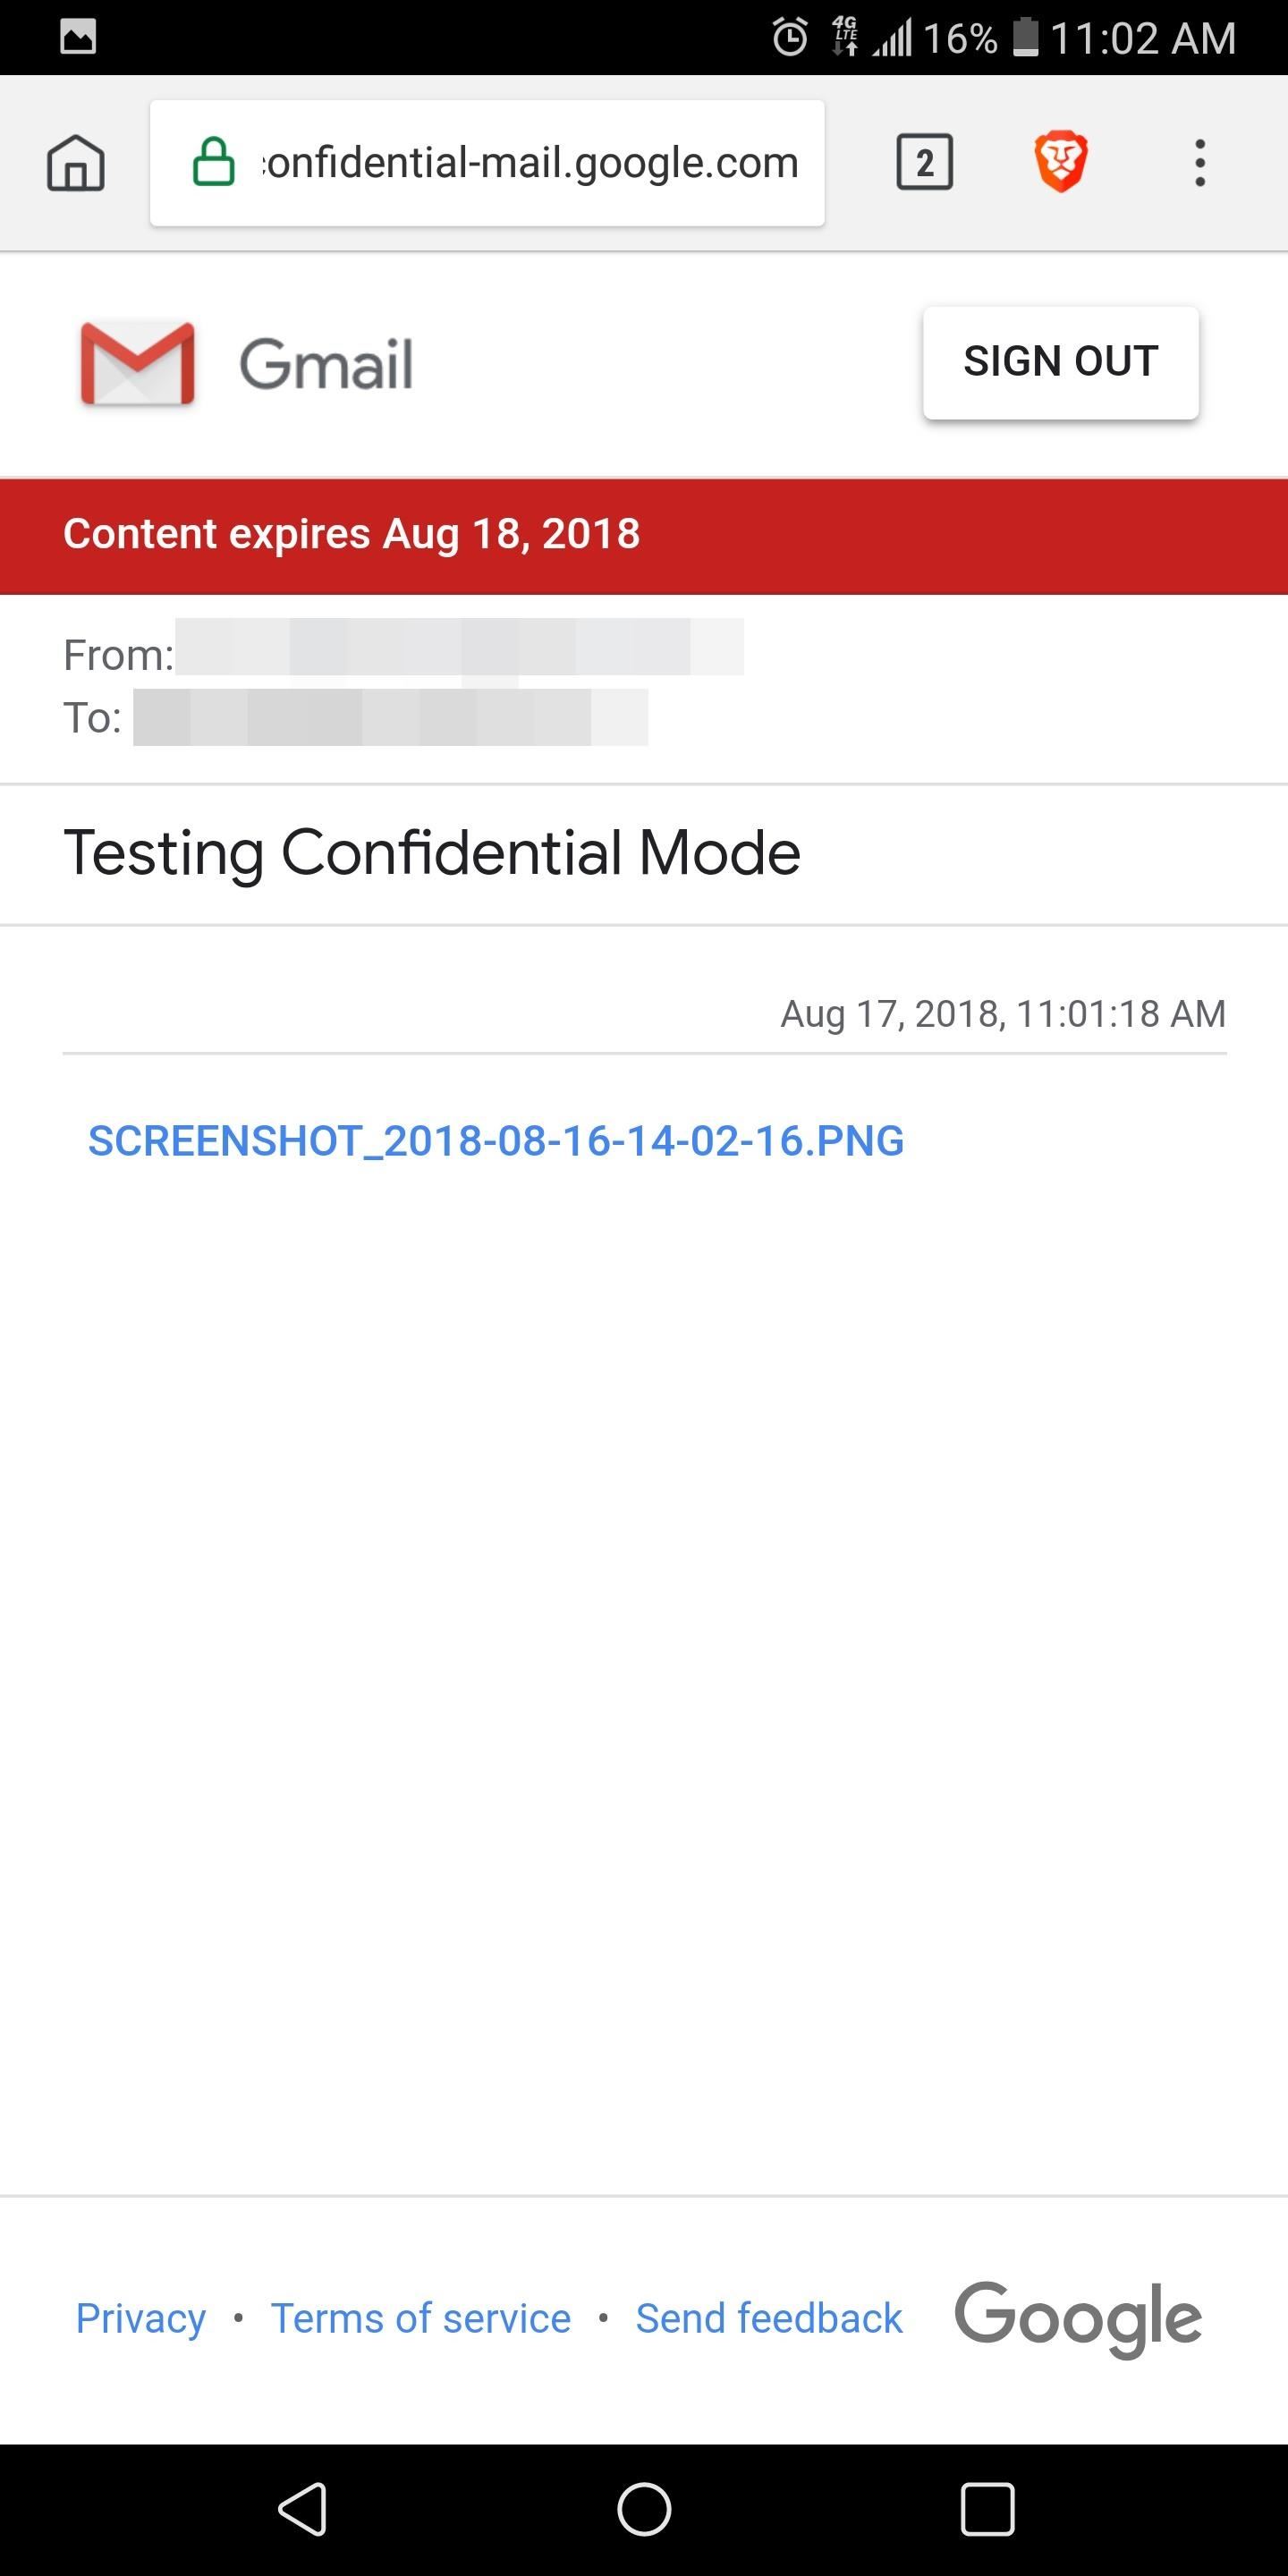 How to Use Gmail's New Confidential Mode to Send Private, Self-Destructing Emails from Your Phone